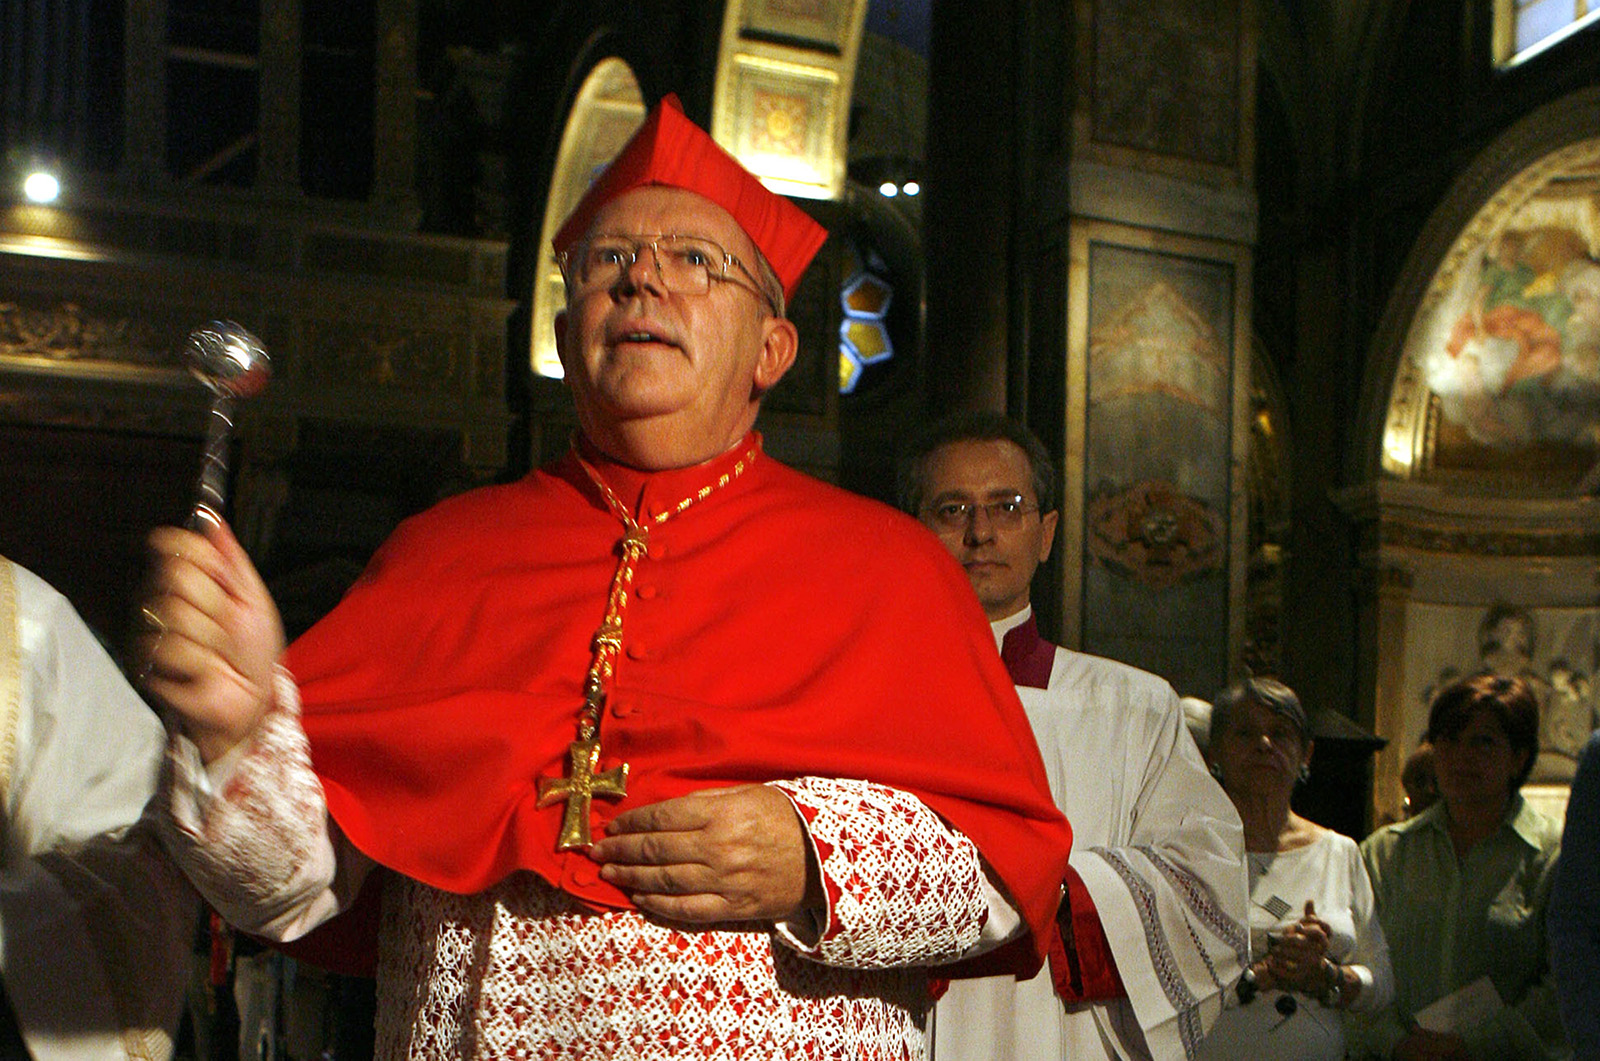 FILE - Archbishop of Bordeaux, France, Cardinal Jean-Pierre Bernard Ricard blesses his titular church — Sant' Agostino — during a ceremony to officially take possession of his church, in Rome, Sunday, Oct. 8, 2006. Cardinal Jean-Pierre Ricard said on Monday, Nov. 7, 2022 that he had abused a 14-year-old girl 35 years ago and is withdrawing from his functions. The move comes after a report issued last year revealed a large number of child sex abuse cases within the country's Catholic Church. (AP Photo/Andrew Medichini, File)